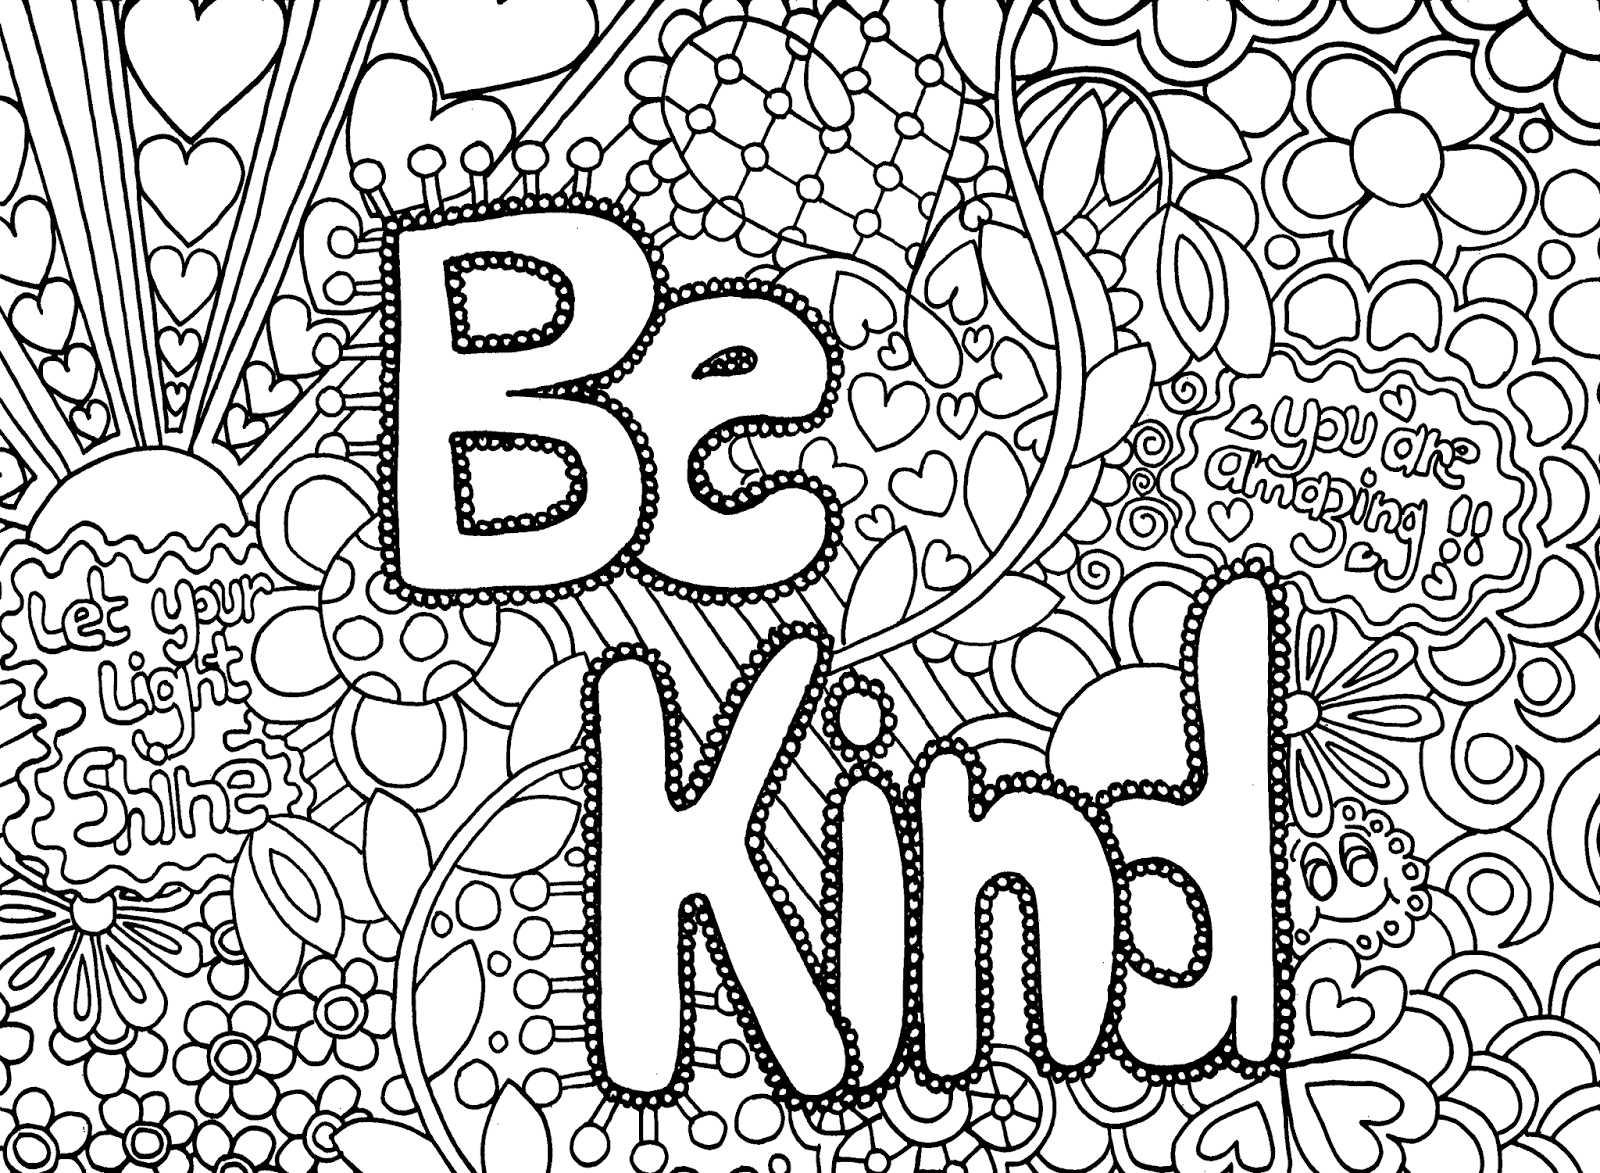 Difficult Hard Coloring Pages Printable | Only Coloring Pages - Free Printable Hard Coloring Pages For Adults